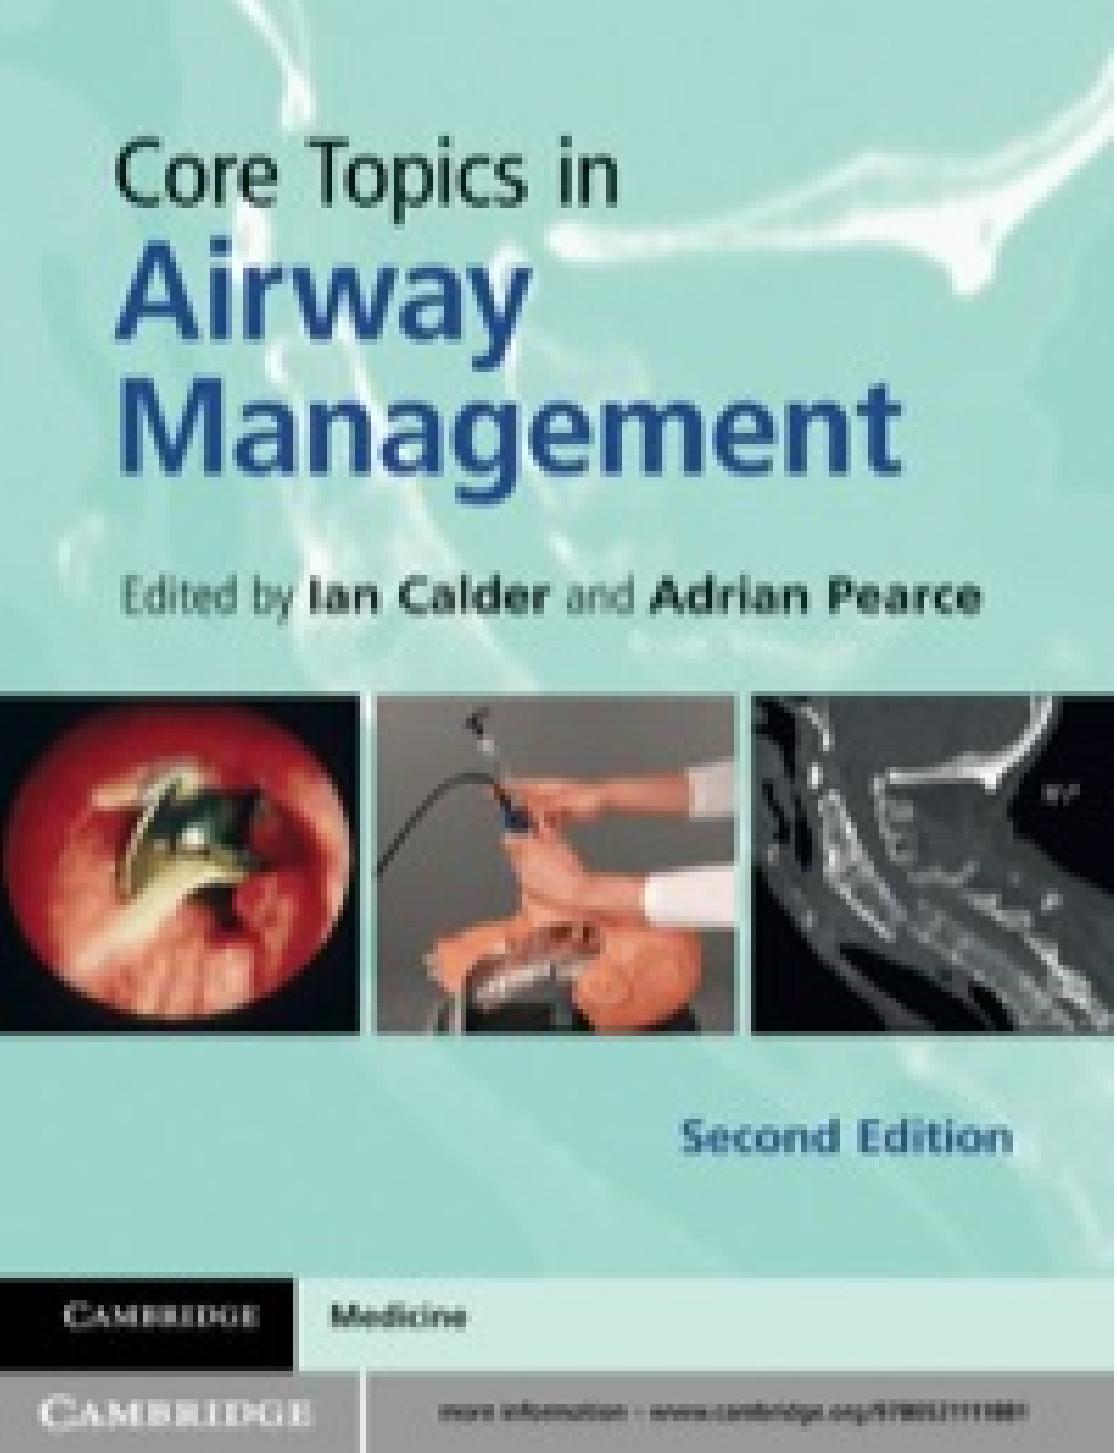 Core Topics in Airway Management 2nd Edition By Ian Calder - Wei Zhi.jpg